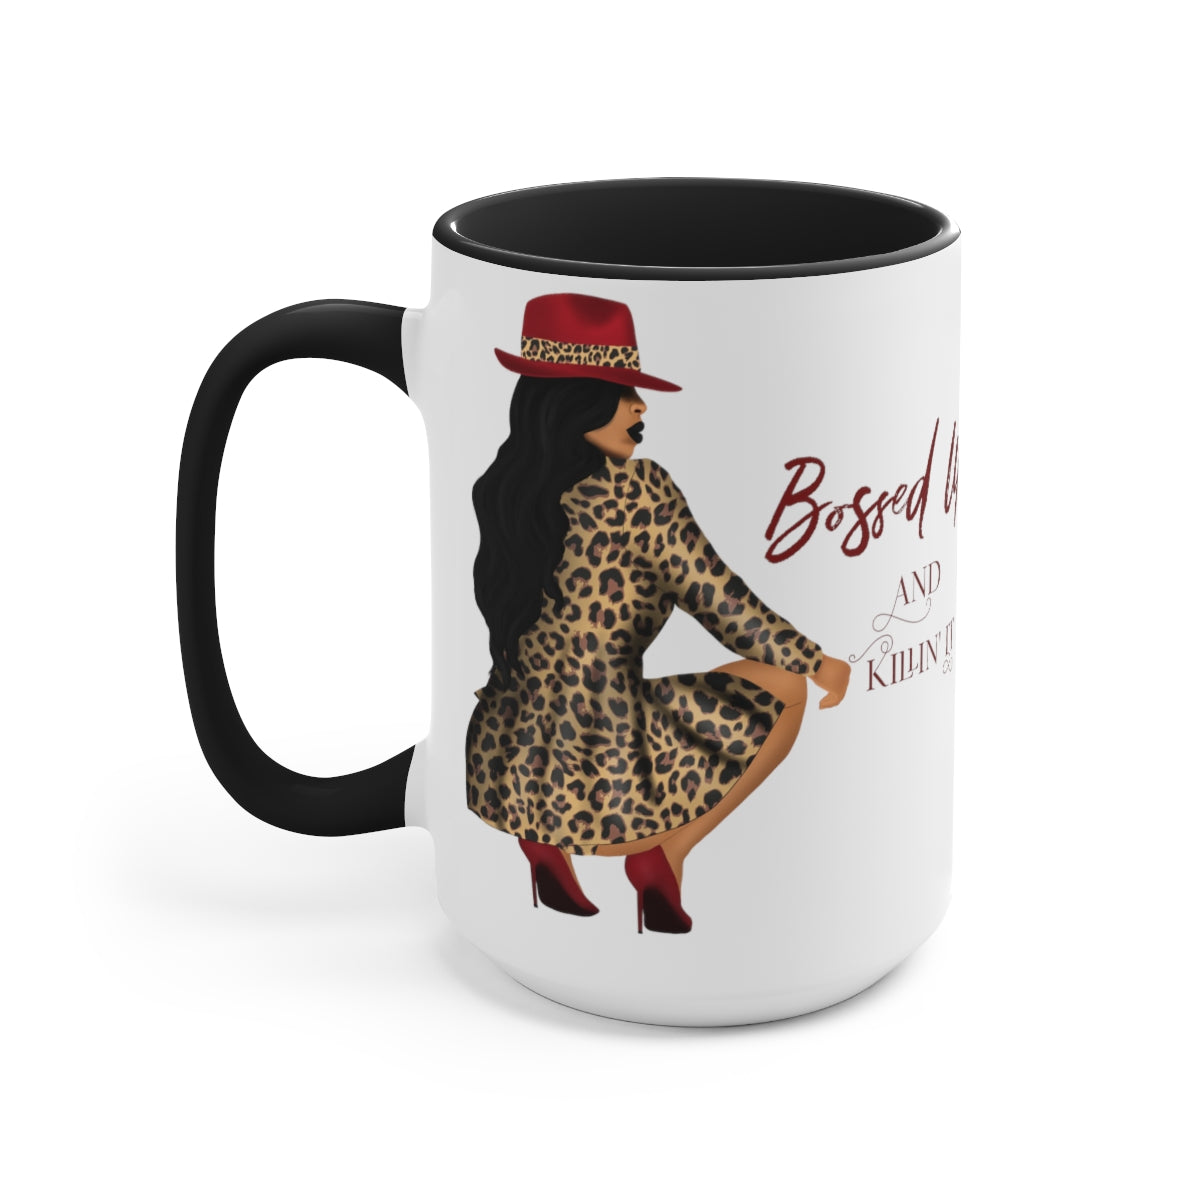 Bossed Up and Killin' It Two-Tone Coffee Mugs, 15oz